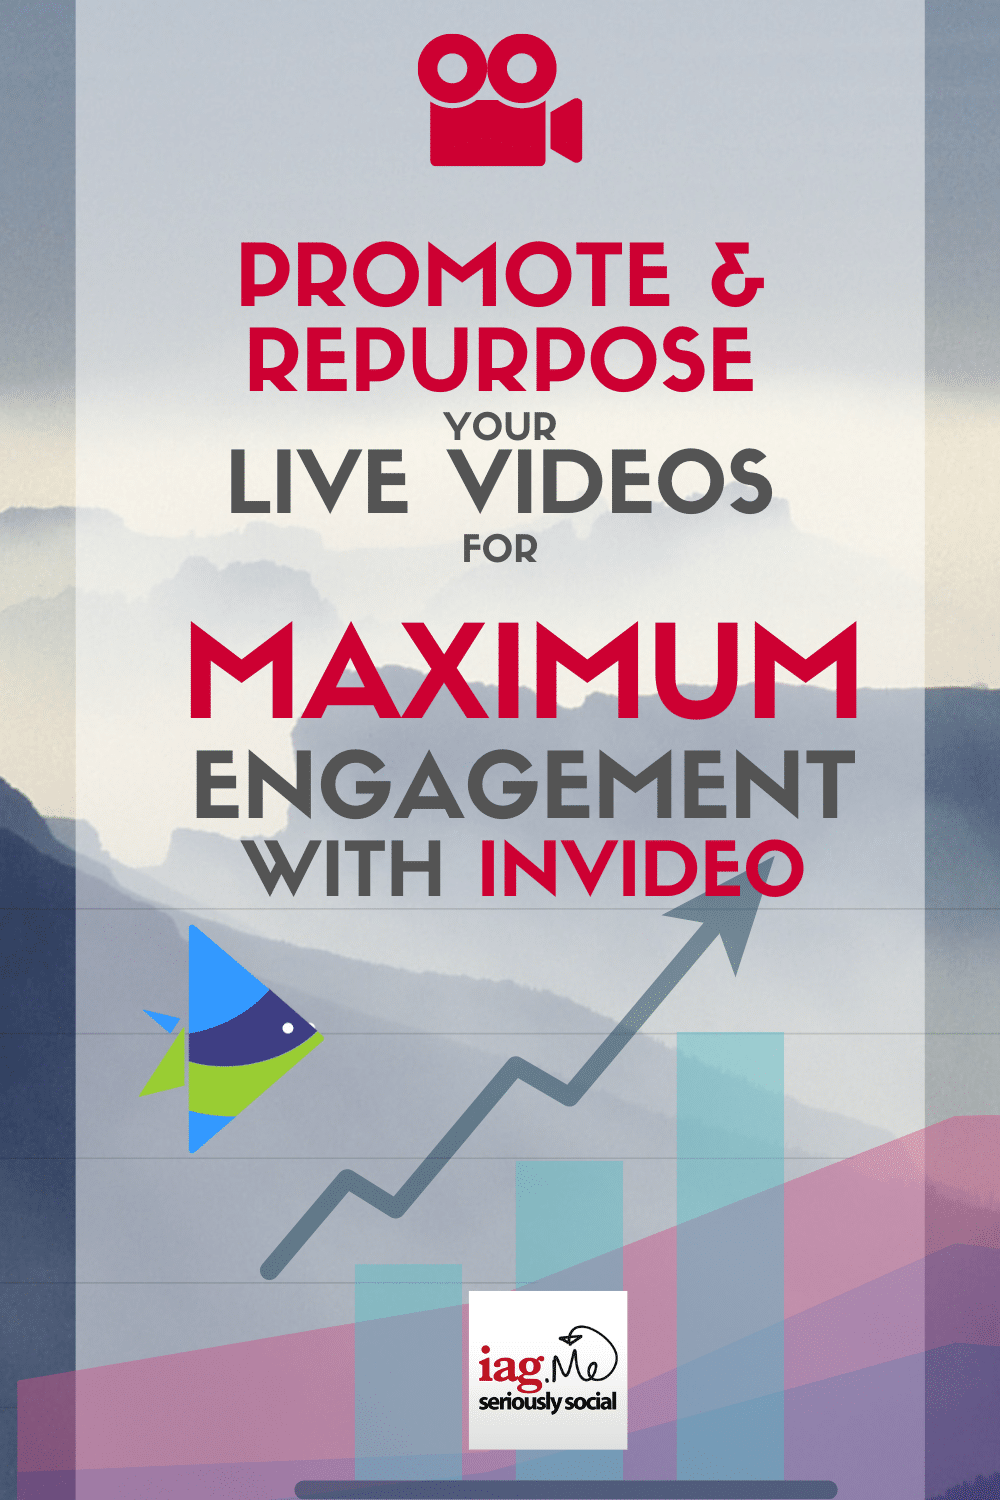 How to Promote and Repurpose your Live Videos for Maximum Engagement with InVideo